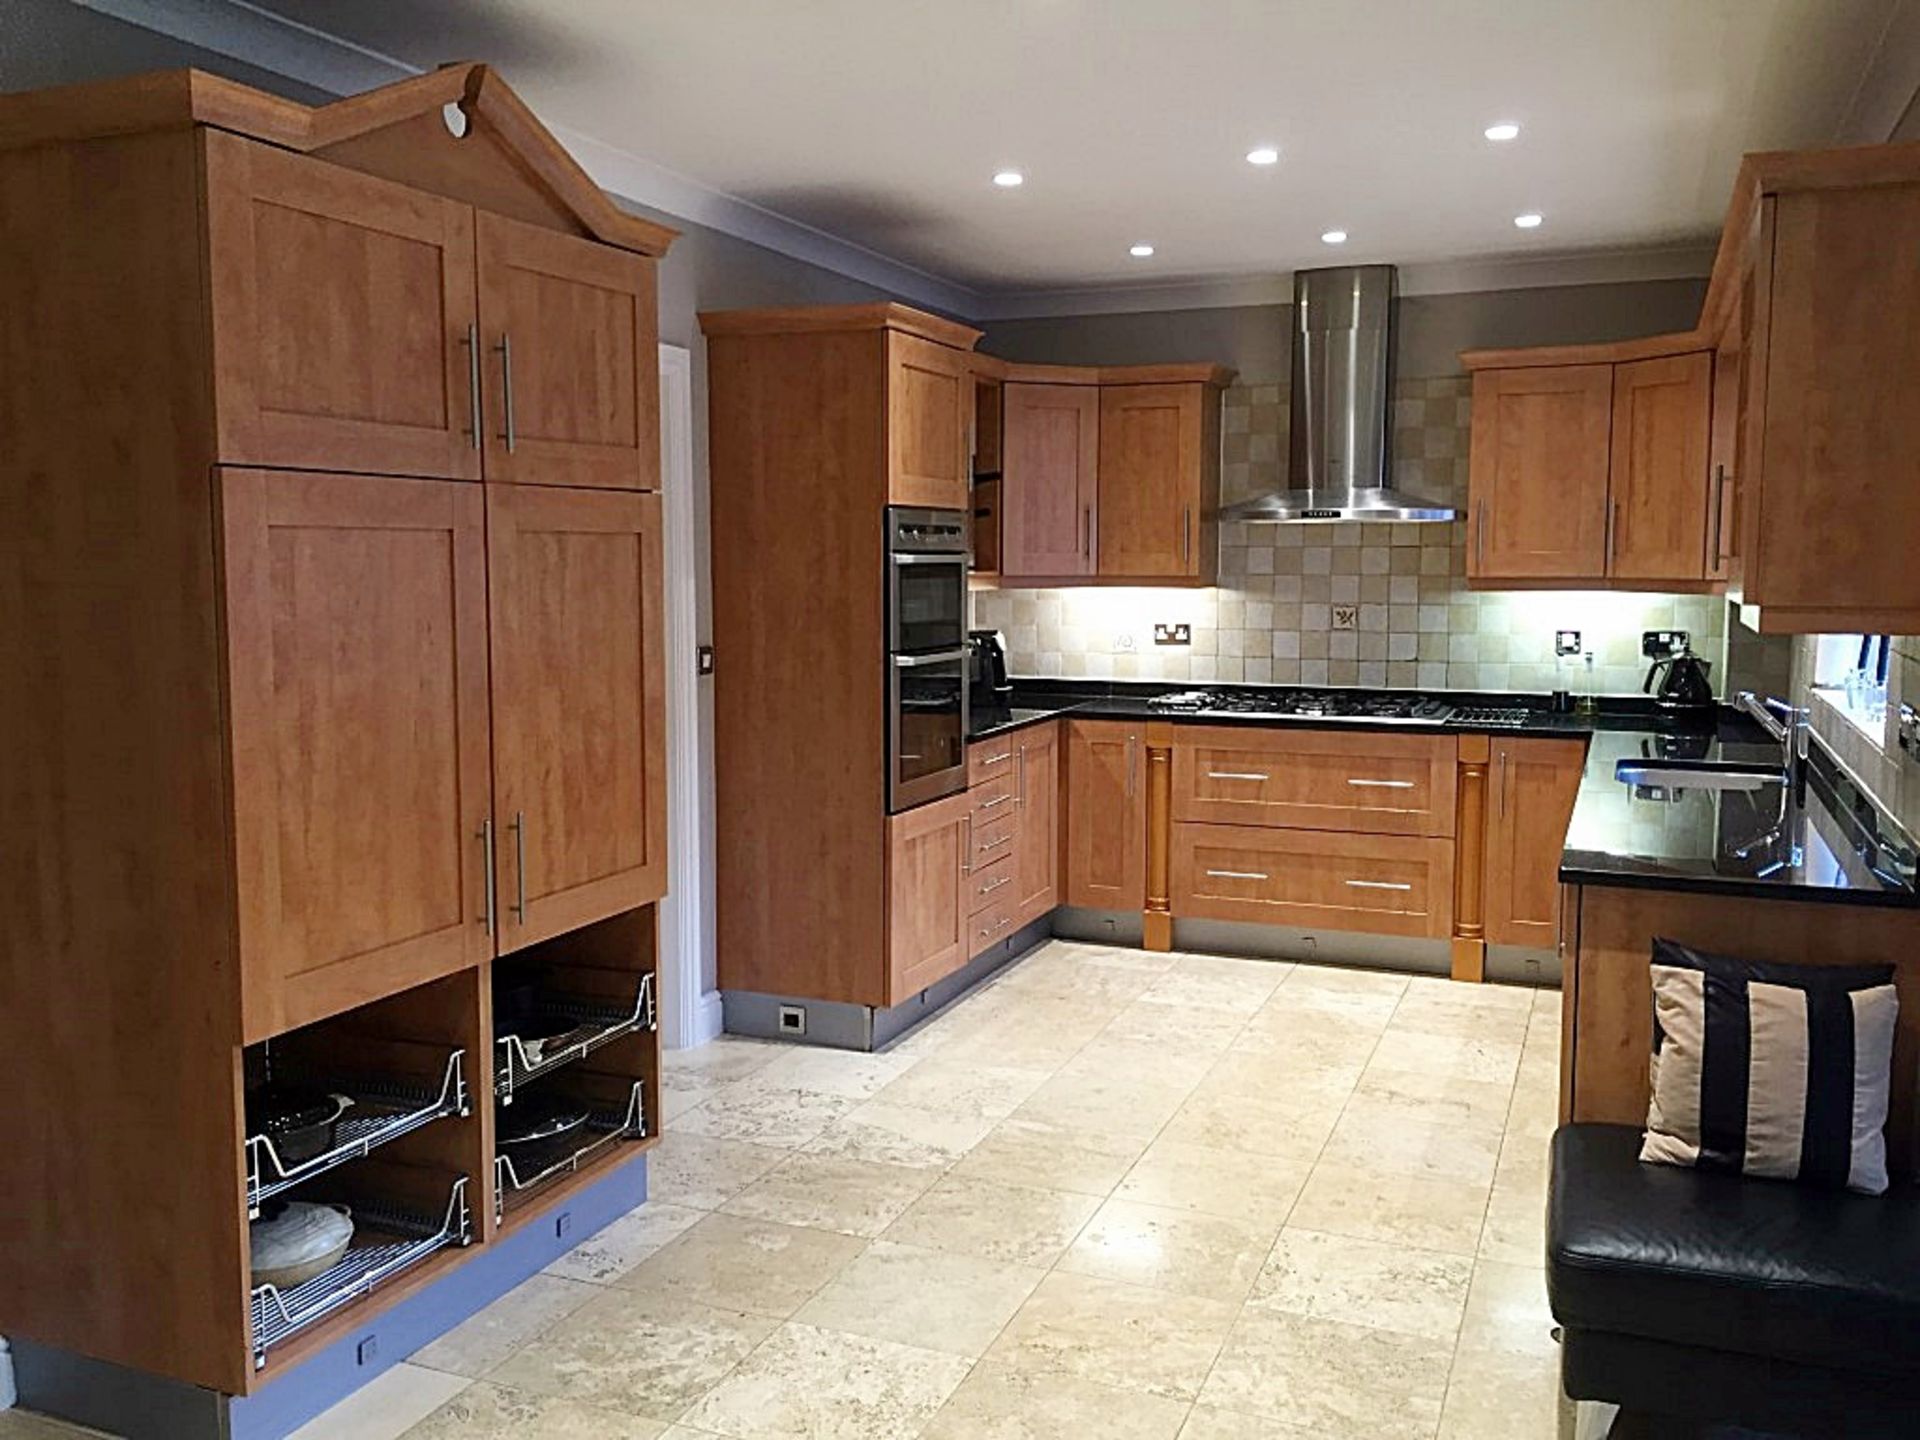 1 x Gemini Fitted Kitchen With Granite Worktops, Integrated AEG Appliances, And Utility Area - CL130